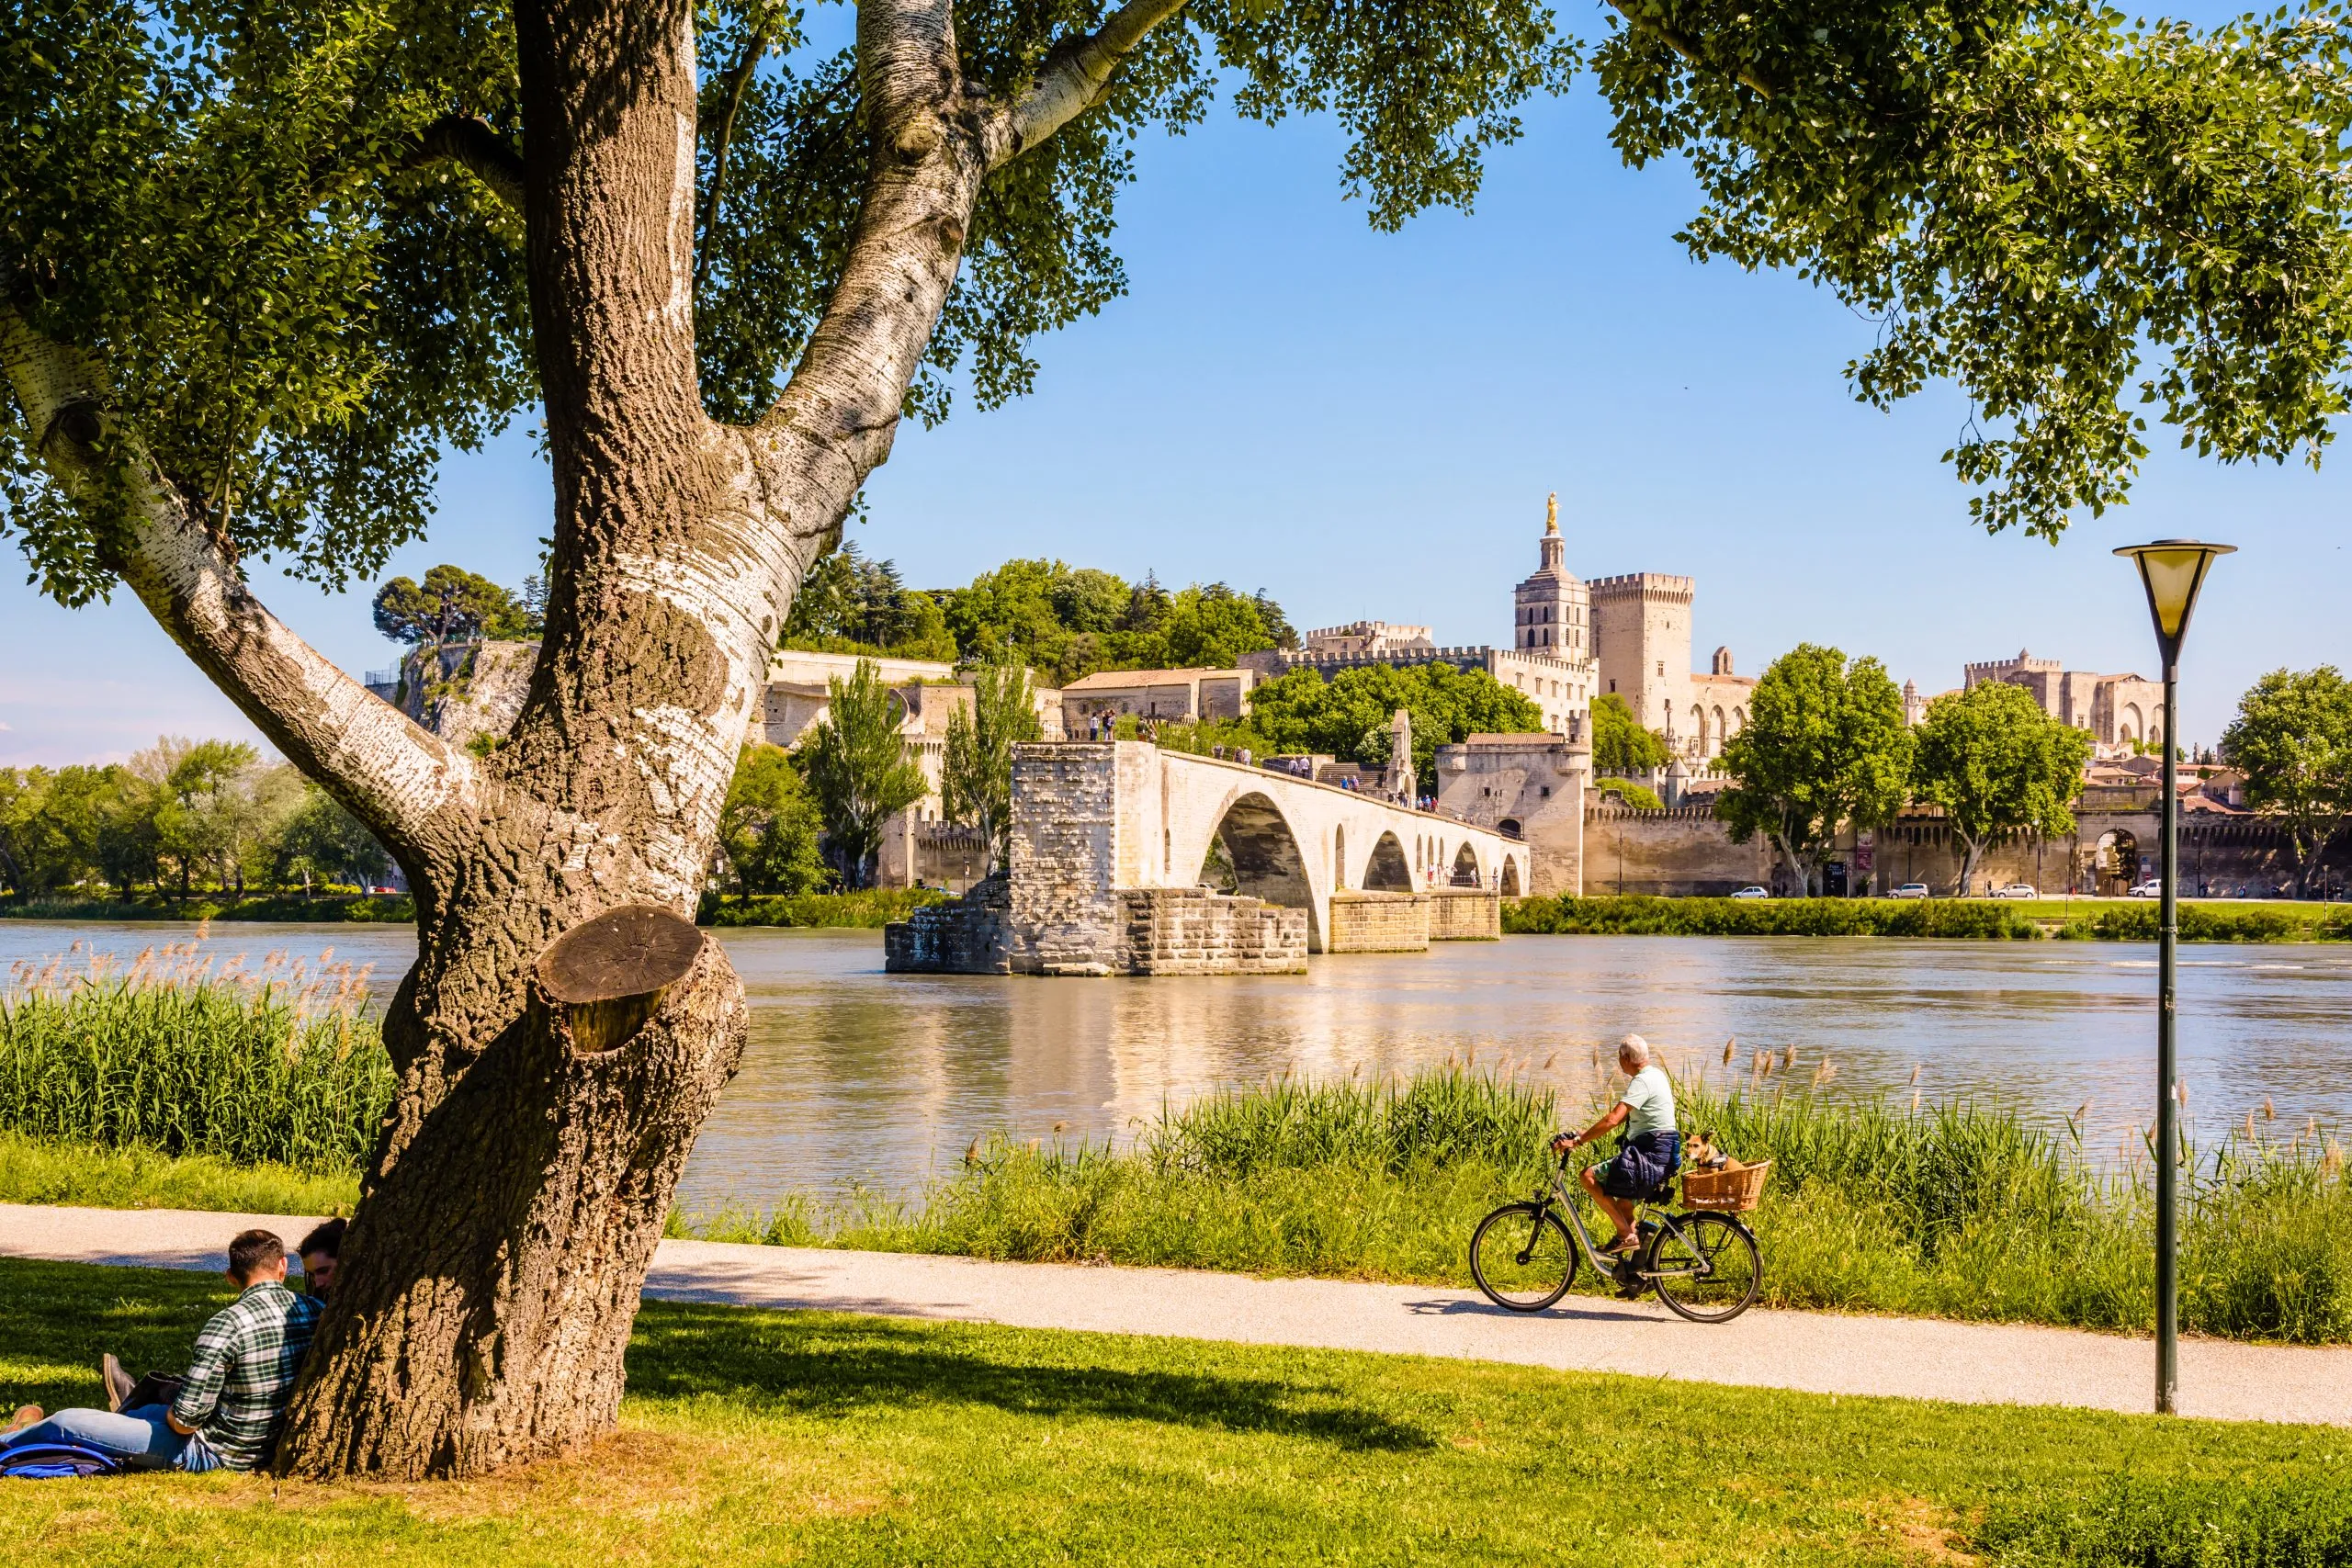 Avignon, France - May 16, 2018: People are biking or resting by a sunny day on the banks of the Rhone, opposite the Saint-Benezet bridge, also known as Avignon bridge, and the Papal palace.